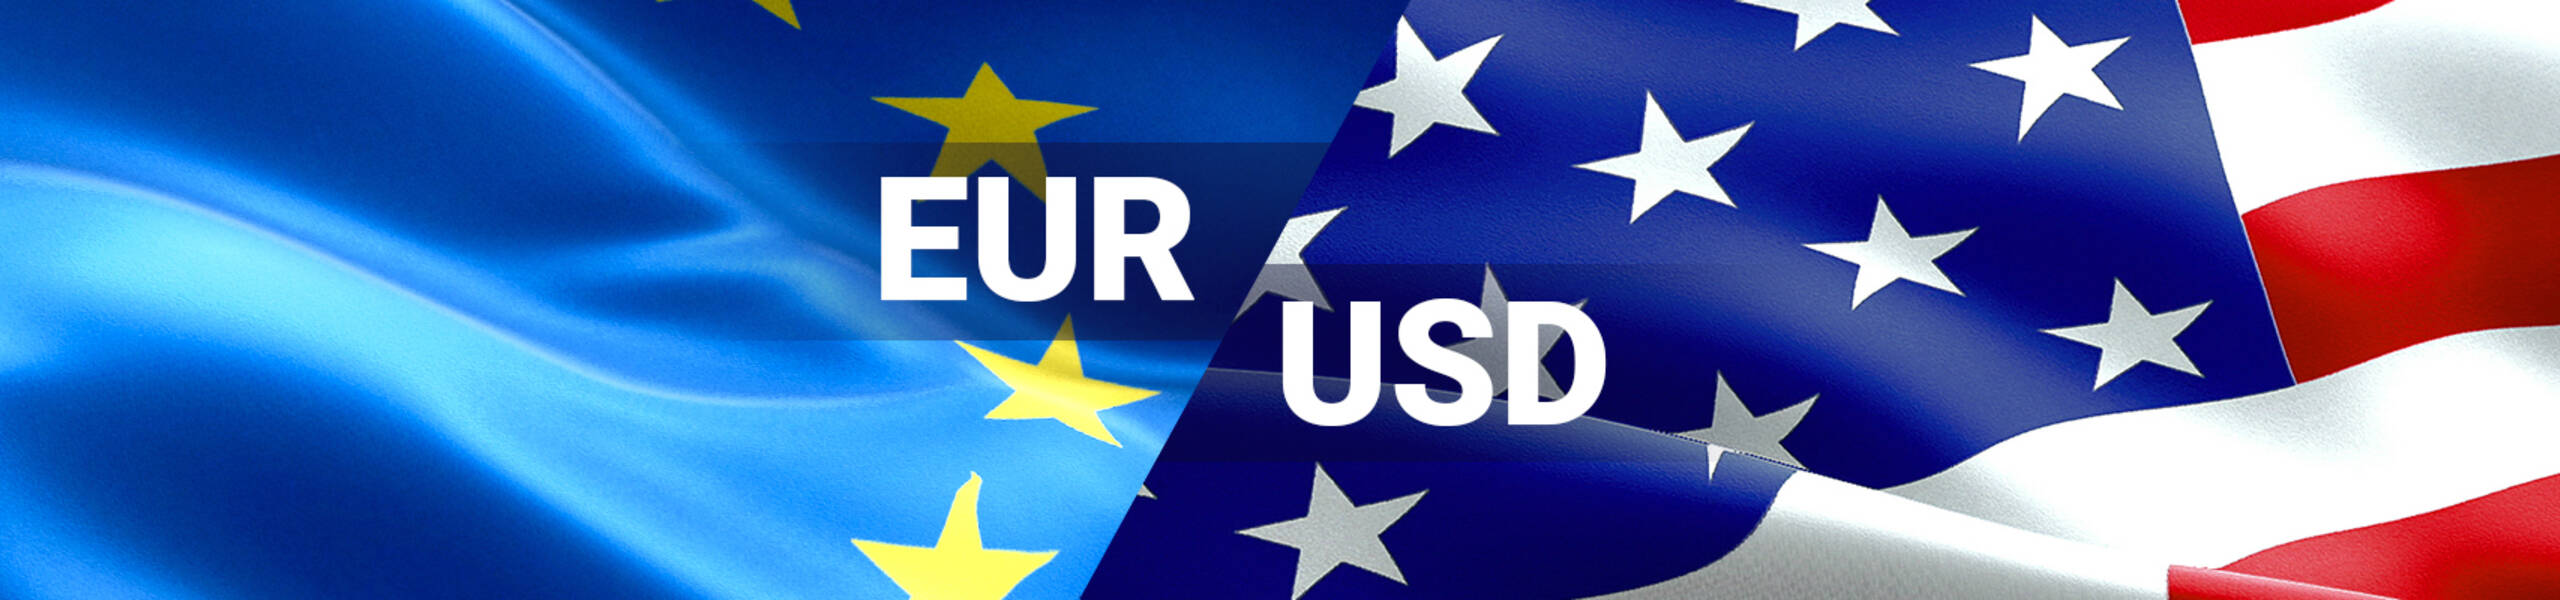 EUR/USD: uptrend may continue